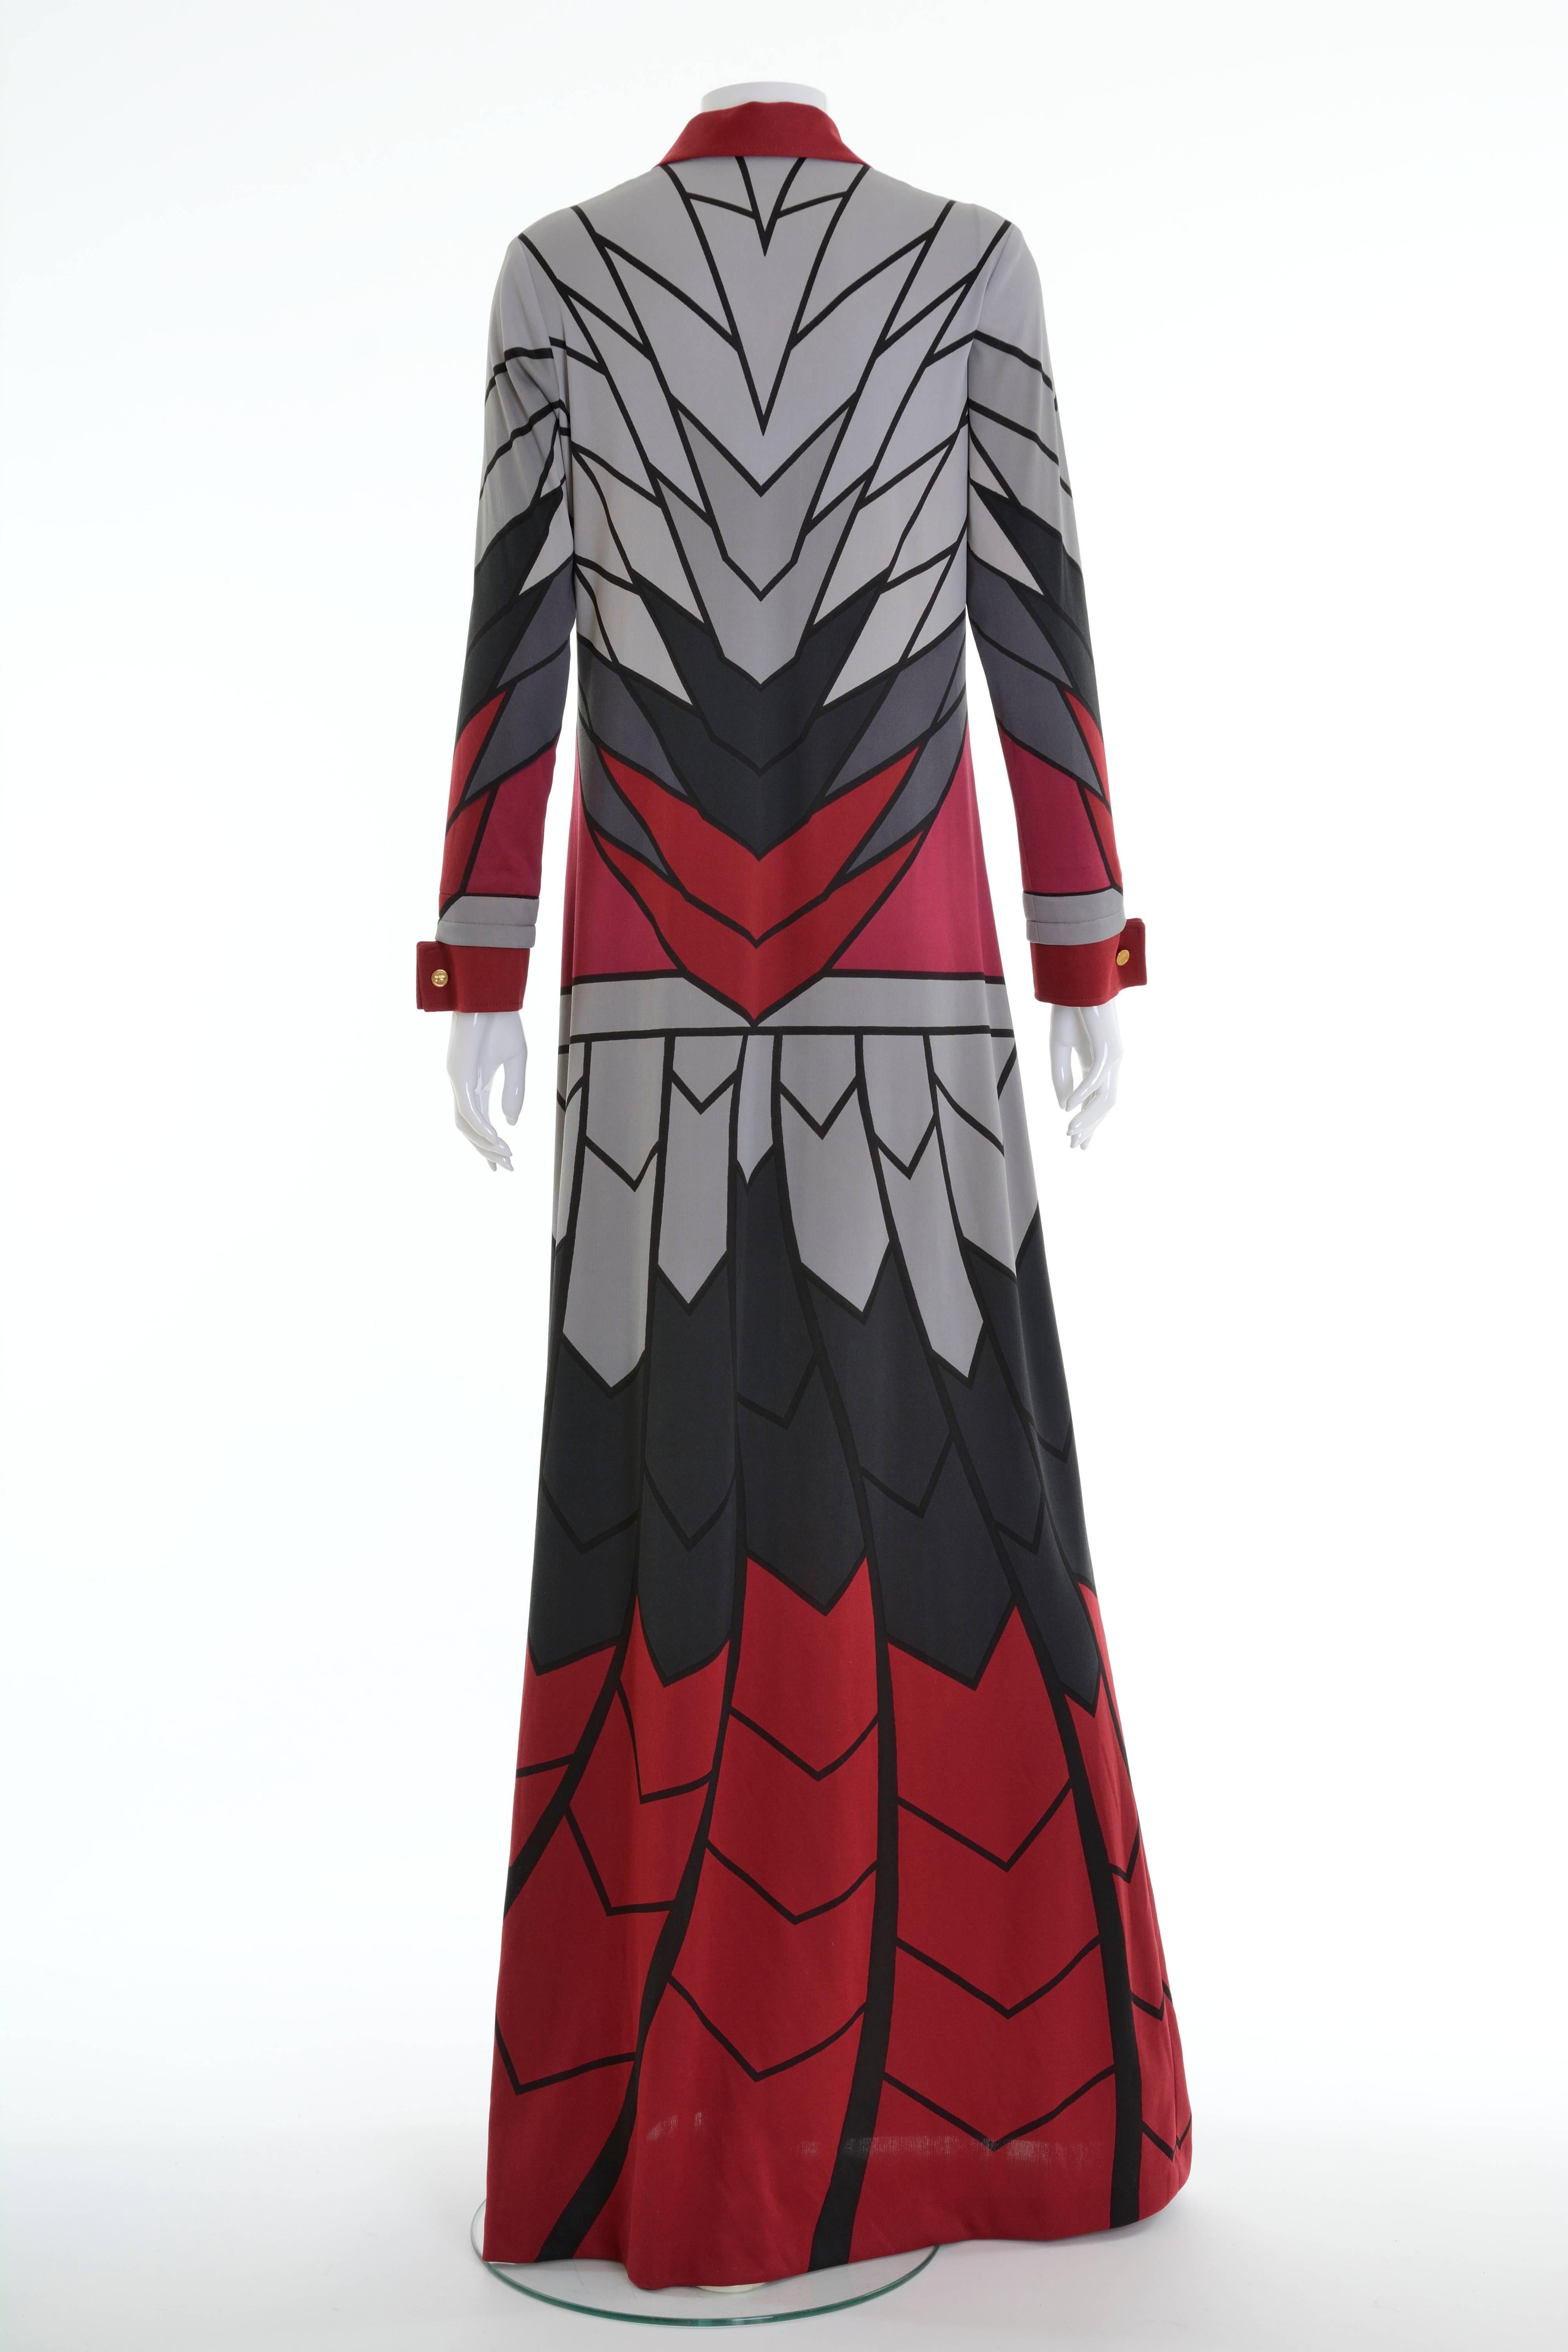 This fabulous 1970s Roberta di Camerino jersey long dress has a great print in dark red and gray colors. She is known for these illustrated designs, Trompe L'Oeil style , that "turn simple pieces into funny and realistically surreal